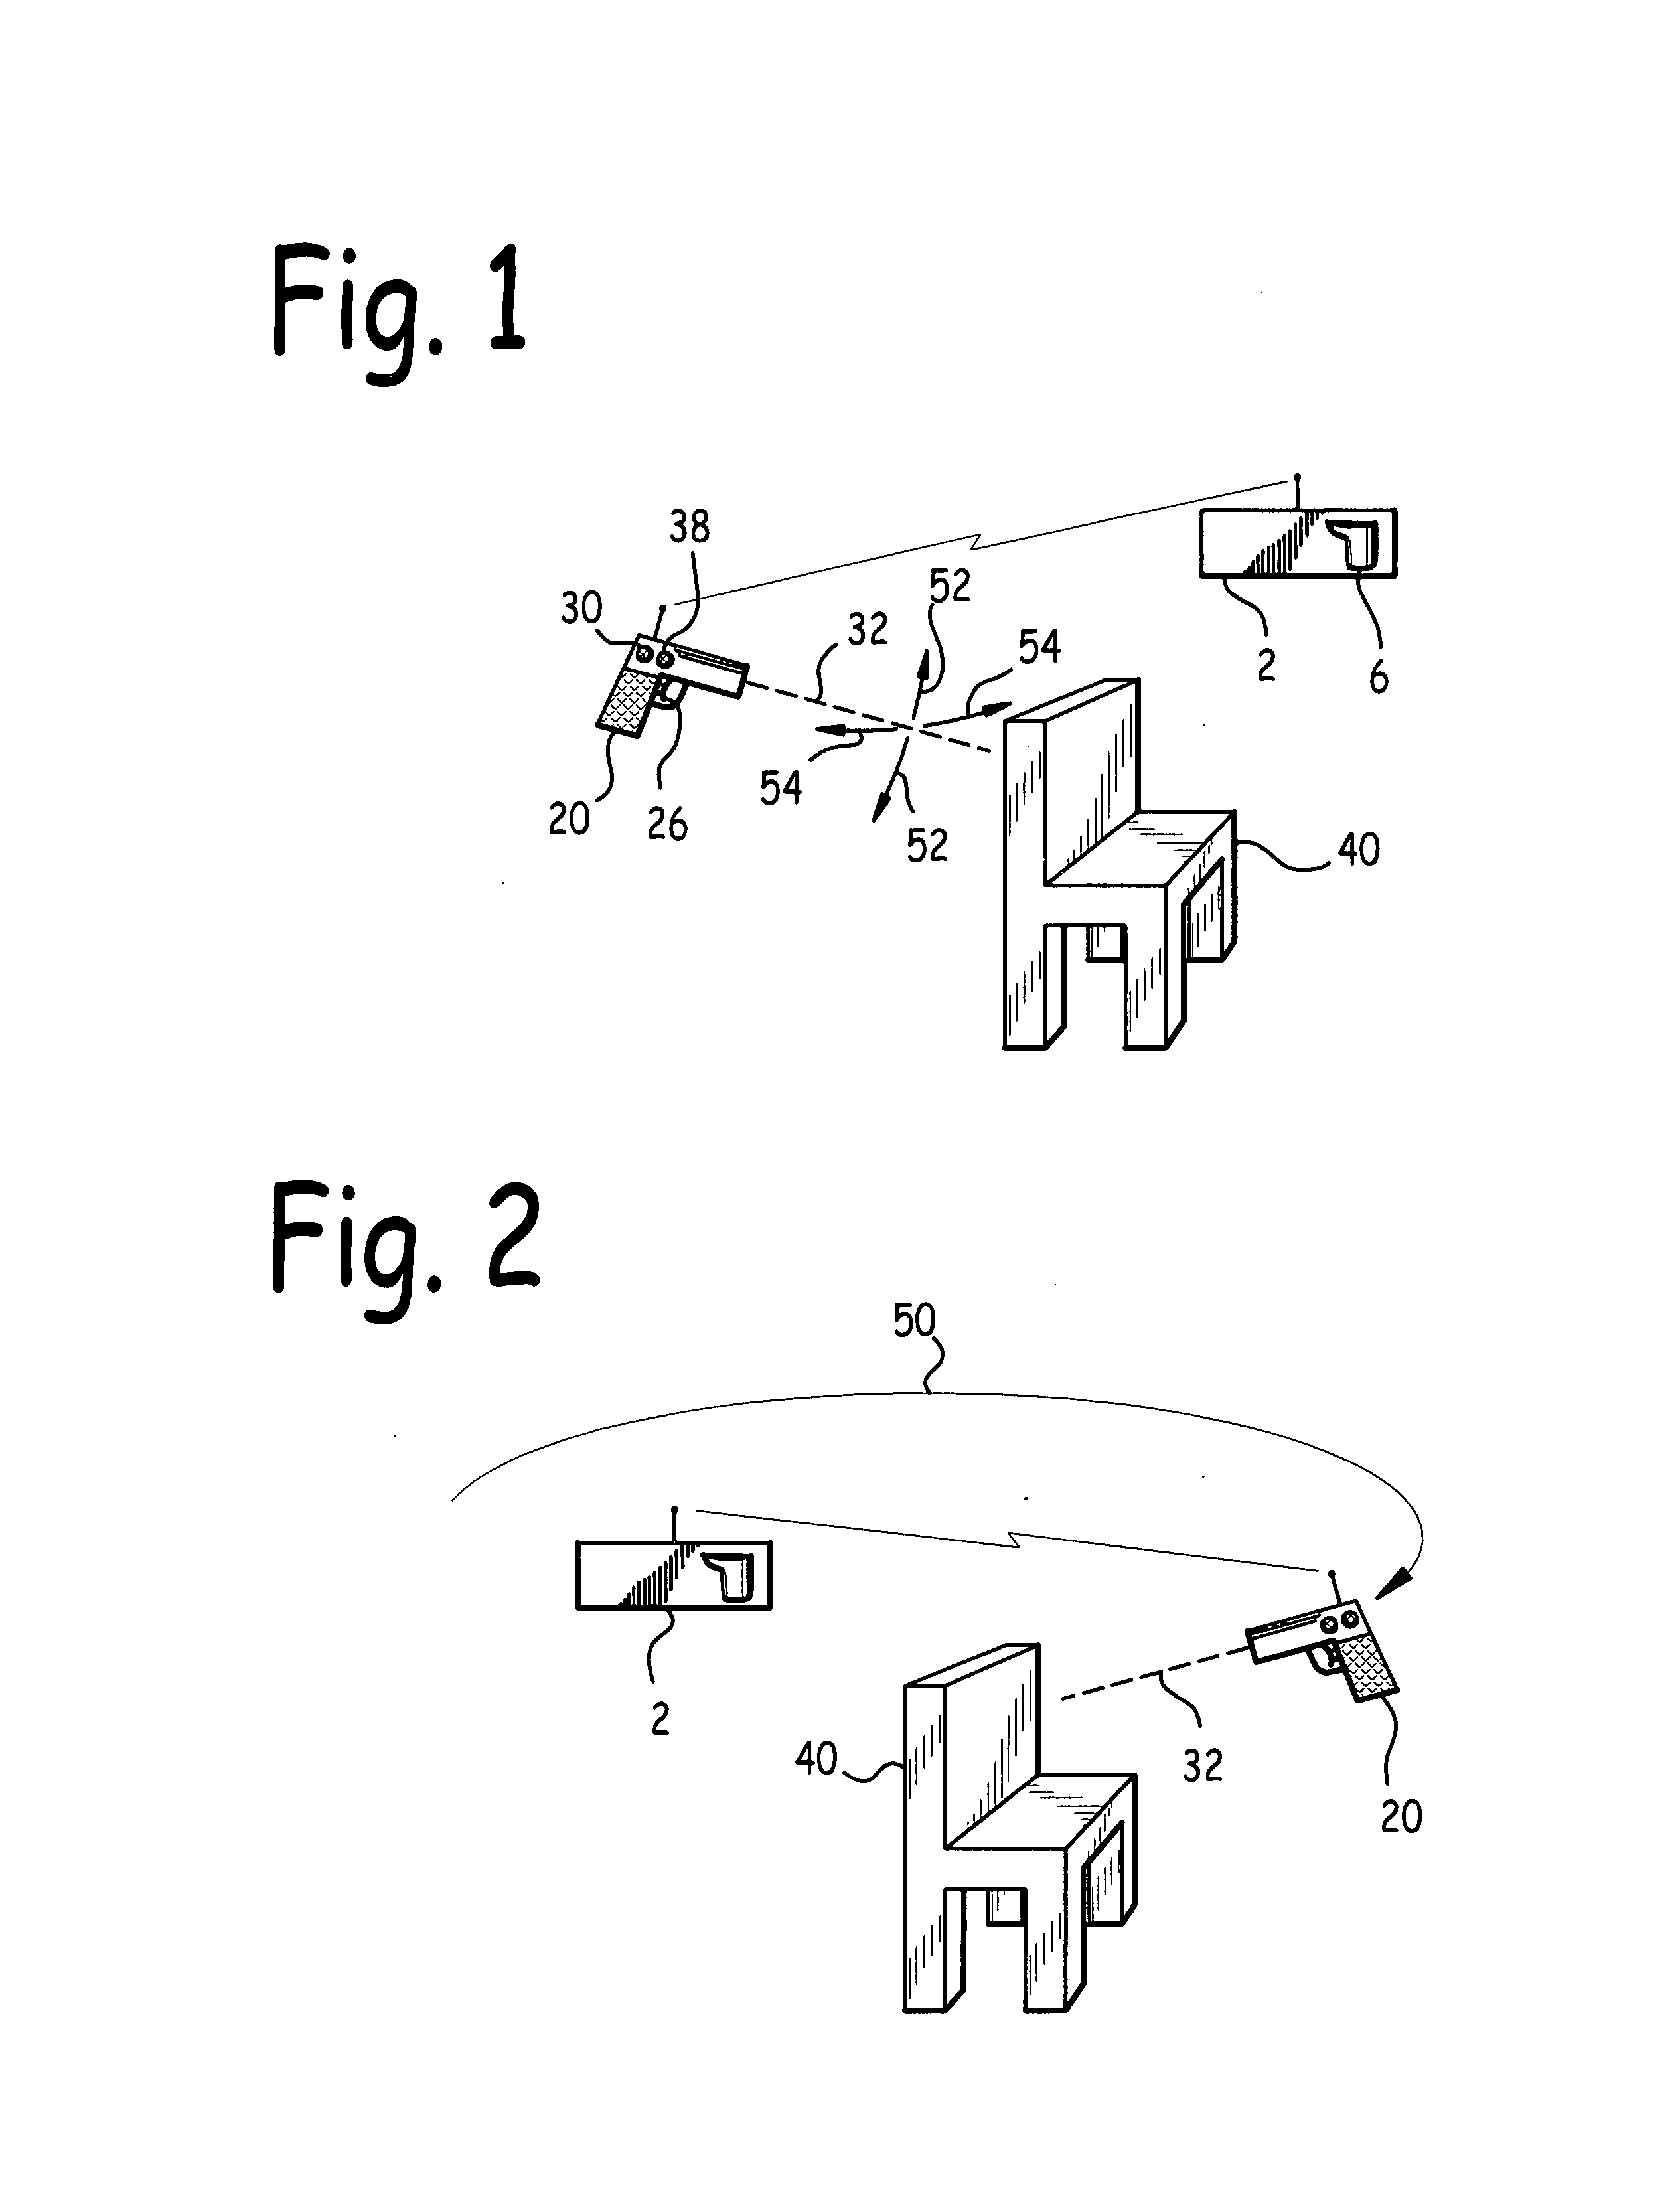 Method for contracting transportation